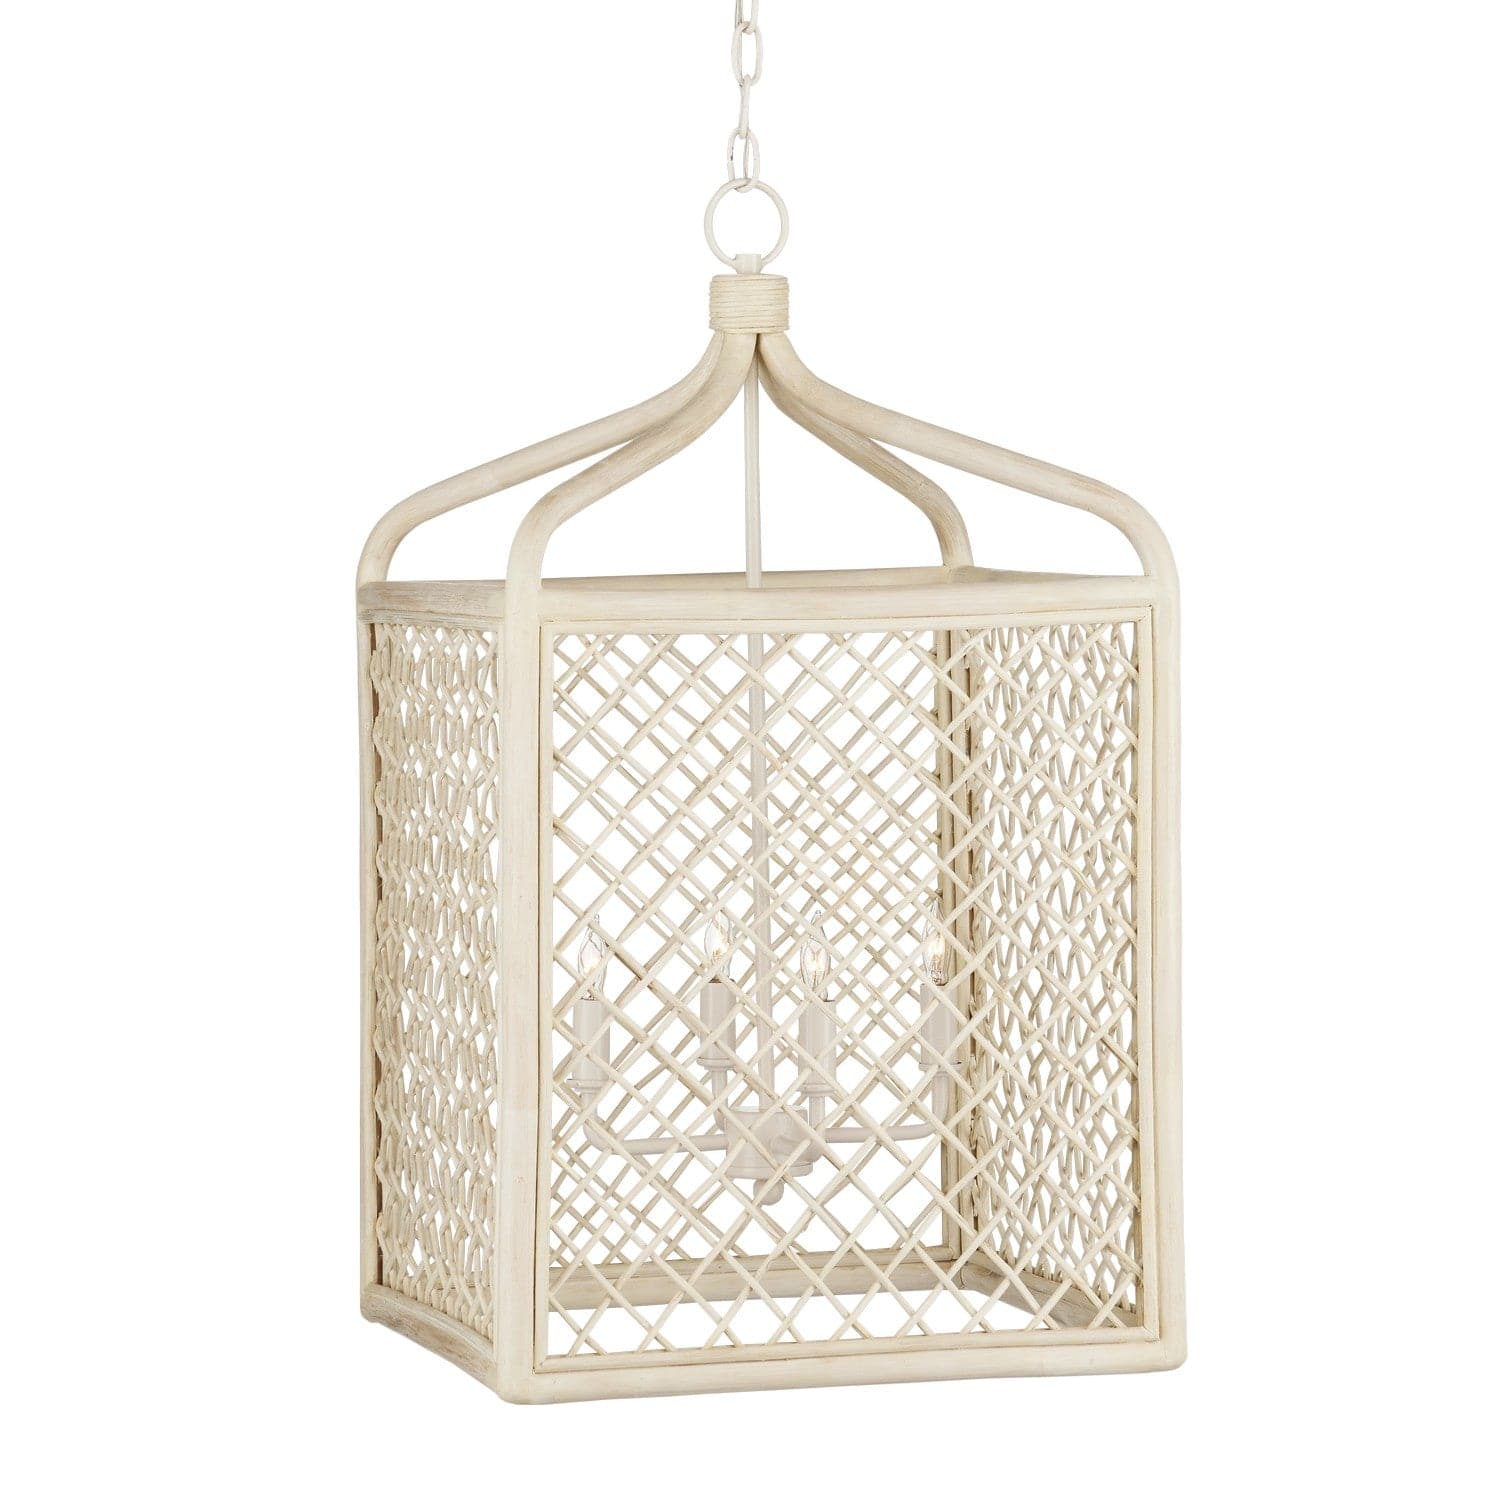 Currey and Company - 9000-0994 - Four Light Lantern - Bleached Natural/Antique Pearl